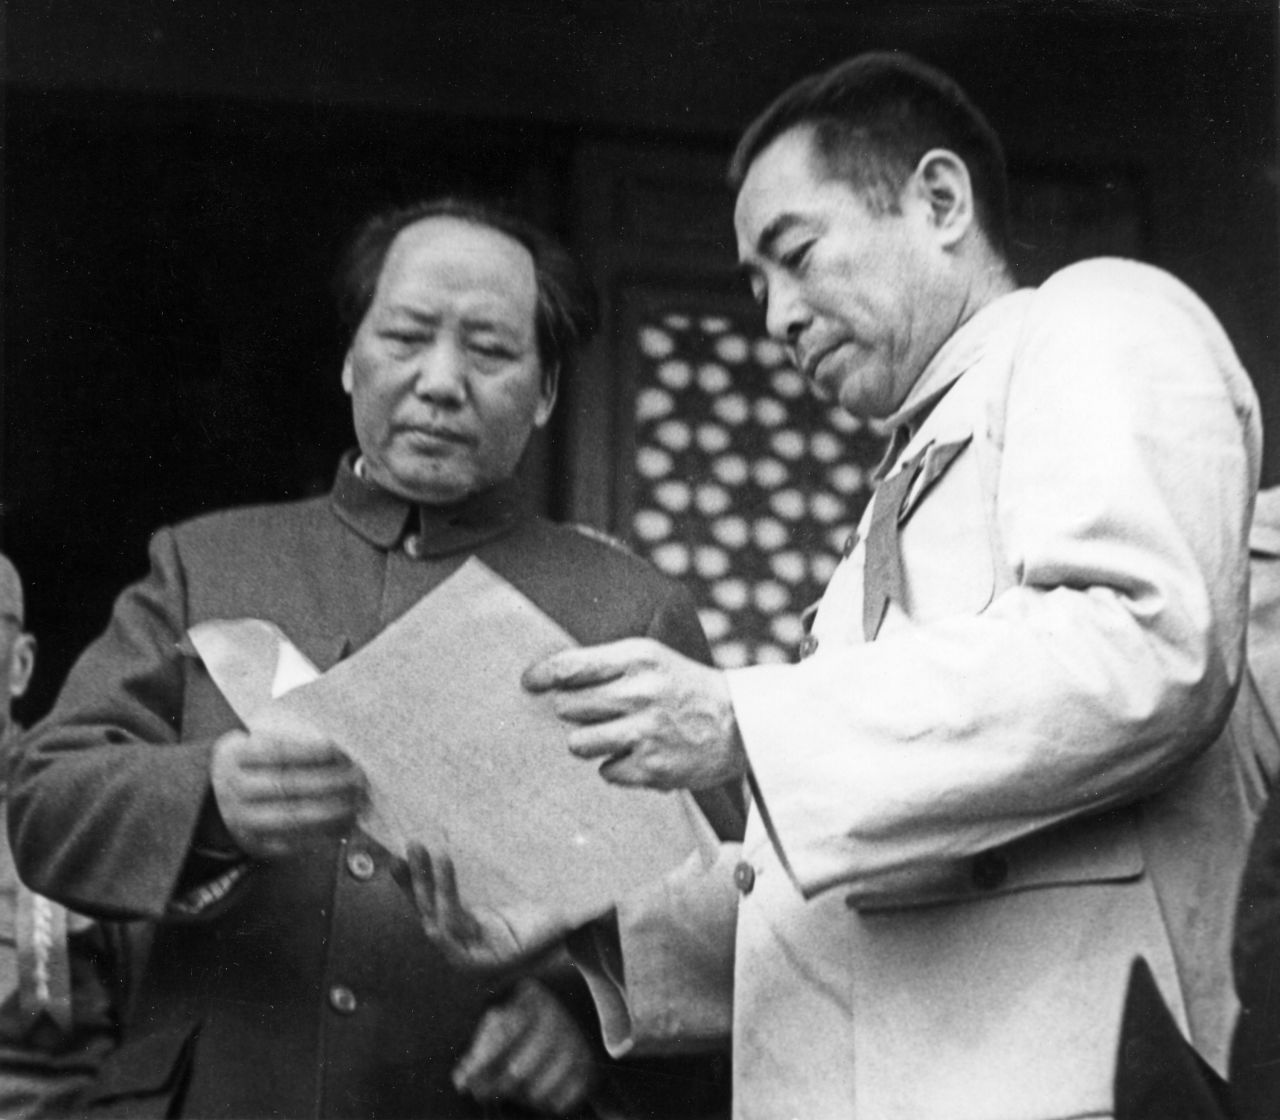 Mao, left, and Zhou Enlai attend the founding ceremony of the People's Republic of China in October 1949, after the Communists defeated the Nationalists in the civil war. Mao named himself head of state and Zhou became premier.<br /><br />The defeated Nationalists, led by Chiang Kai-shek, fled to the island of Taiwan.